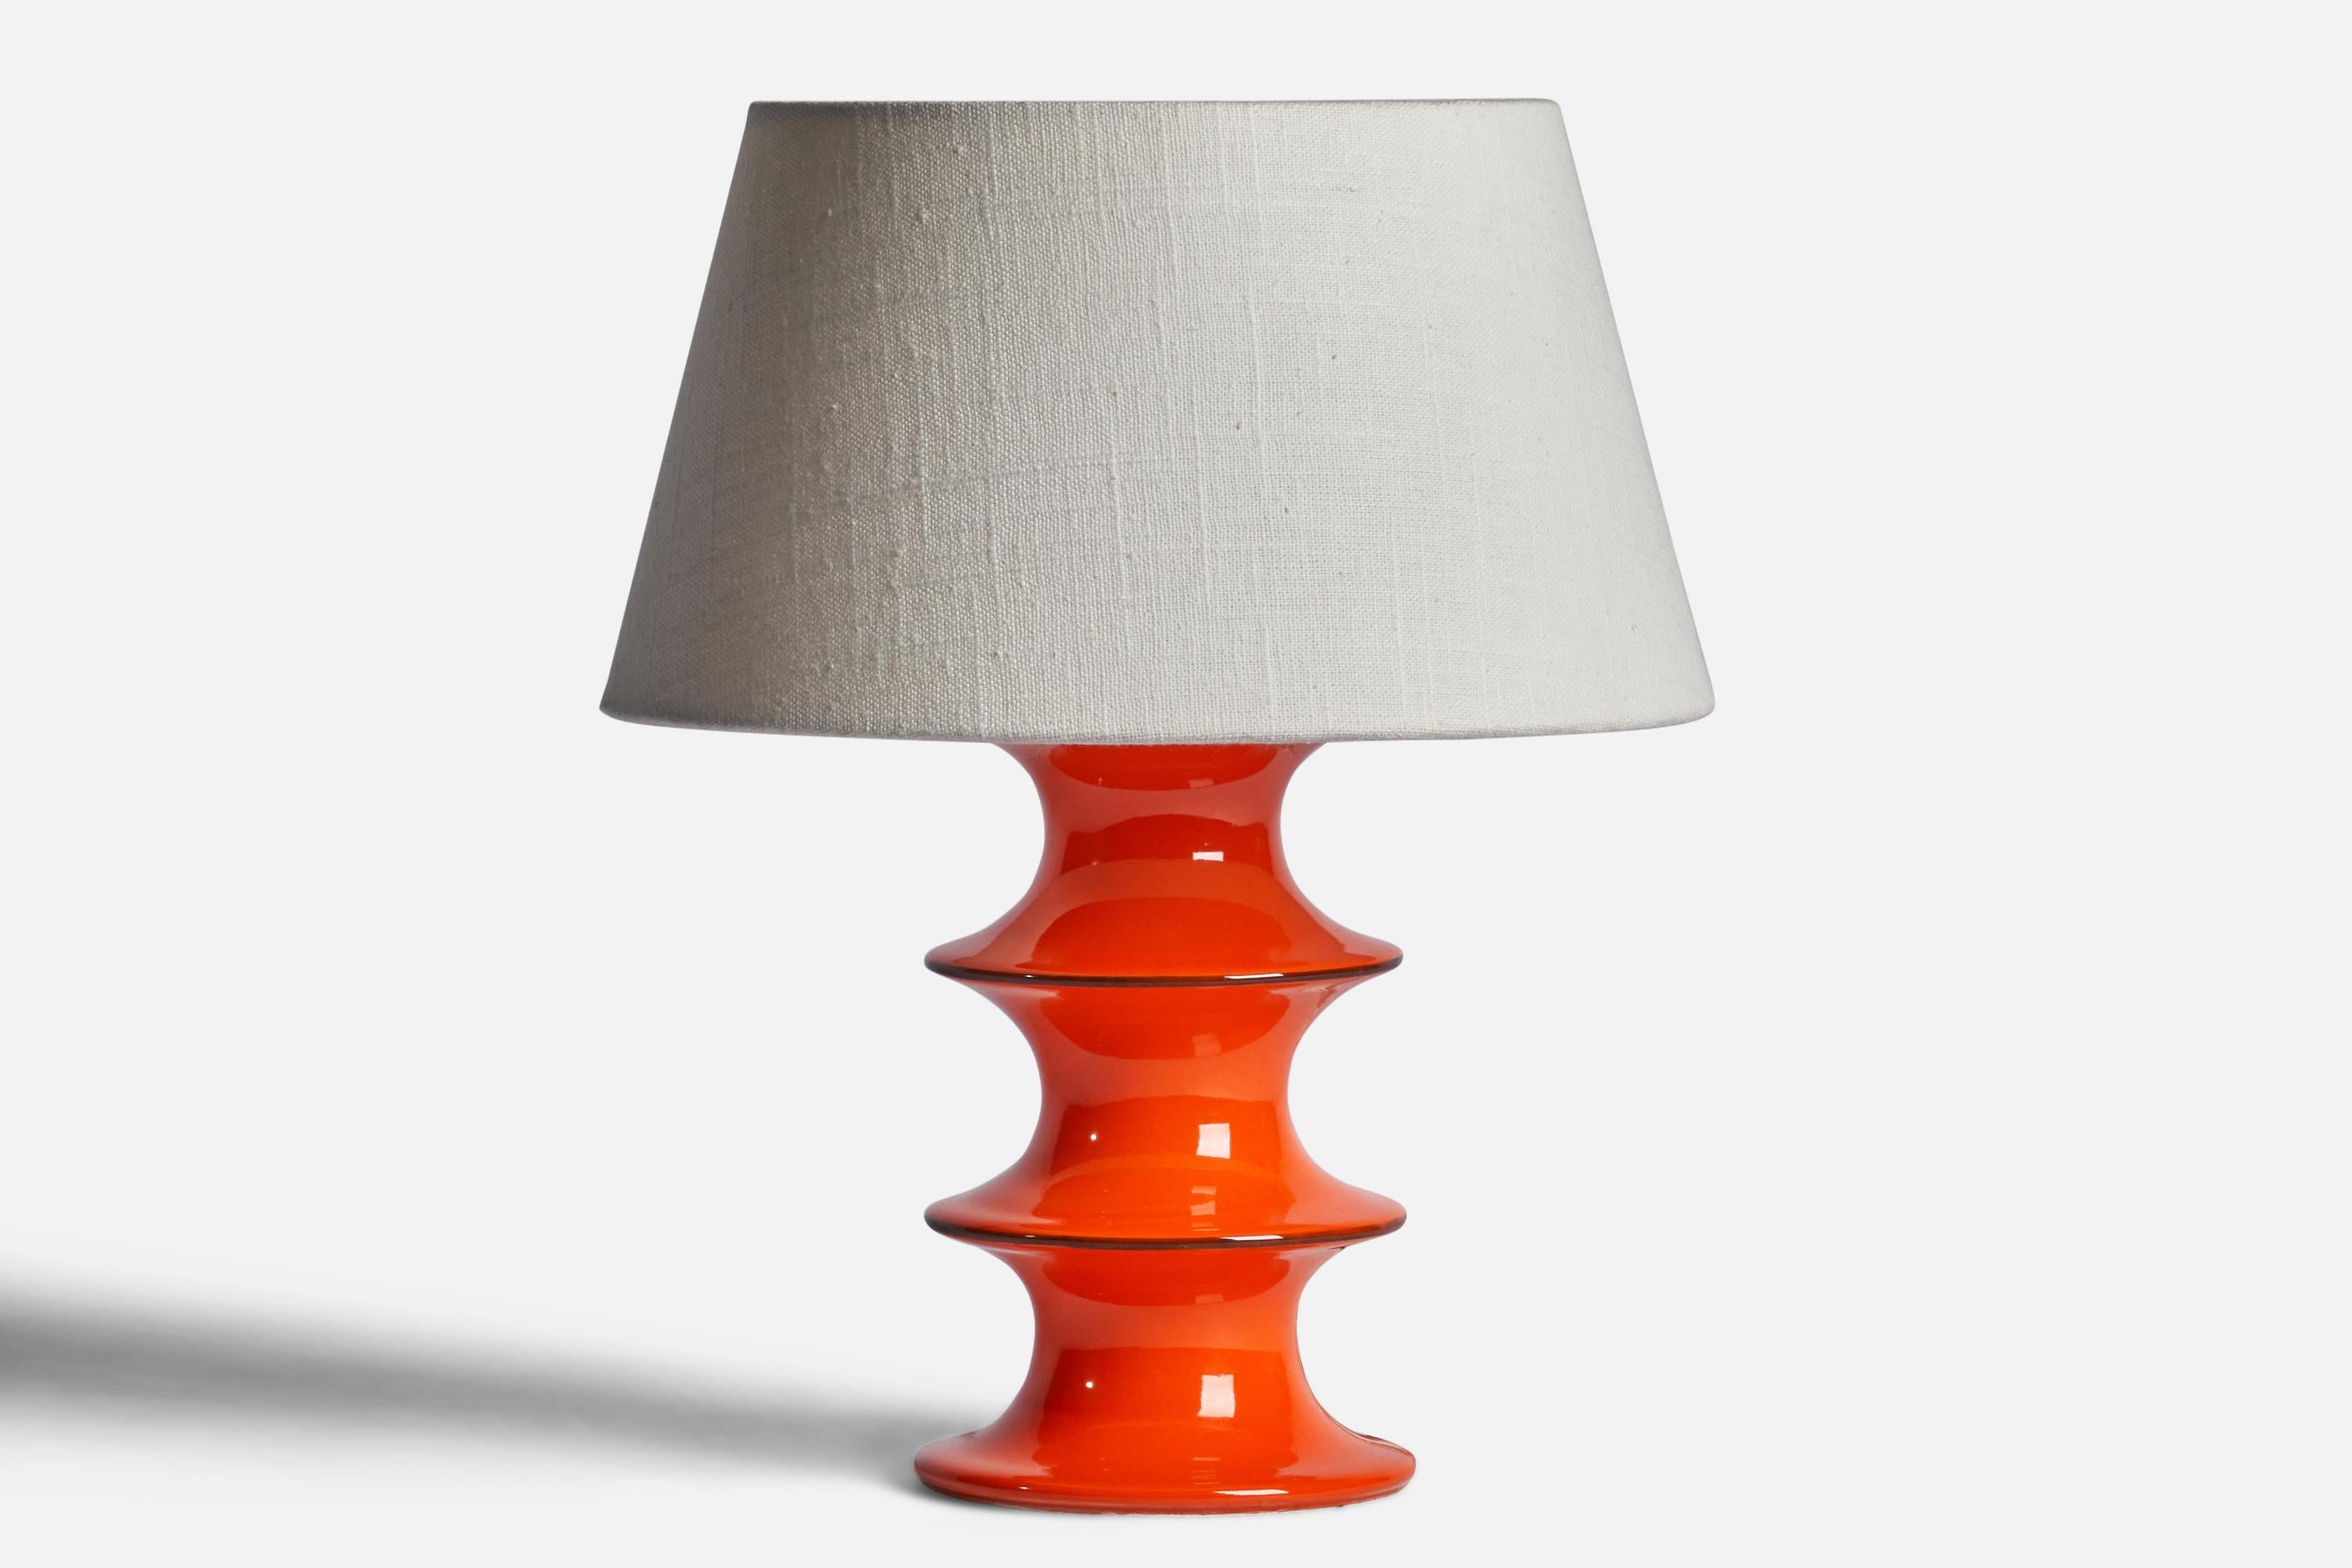 An orange-glazed stoneware table lamp designed by Inger Persson and produced by Rörstrand, Sweden, 1950s.

Dimensions of Lamp (inches): 9.35” H x 4.5” Diameter
Dimensions of Shade (inches): 7” Top Diameter x 10” Bottom Diameter x 5.5” H 
Dimensions